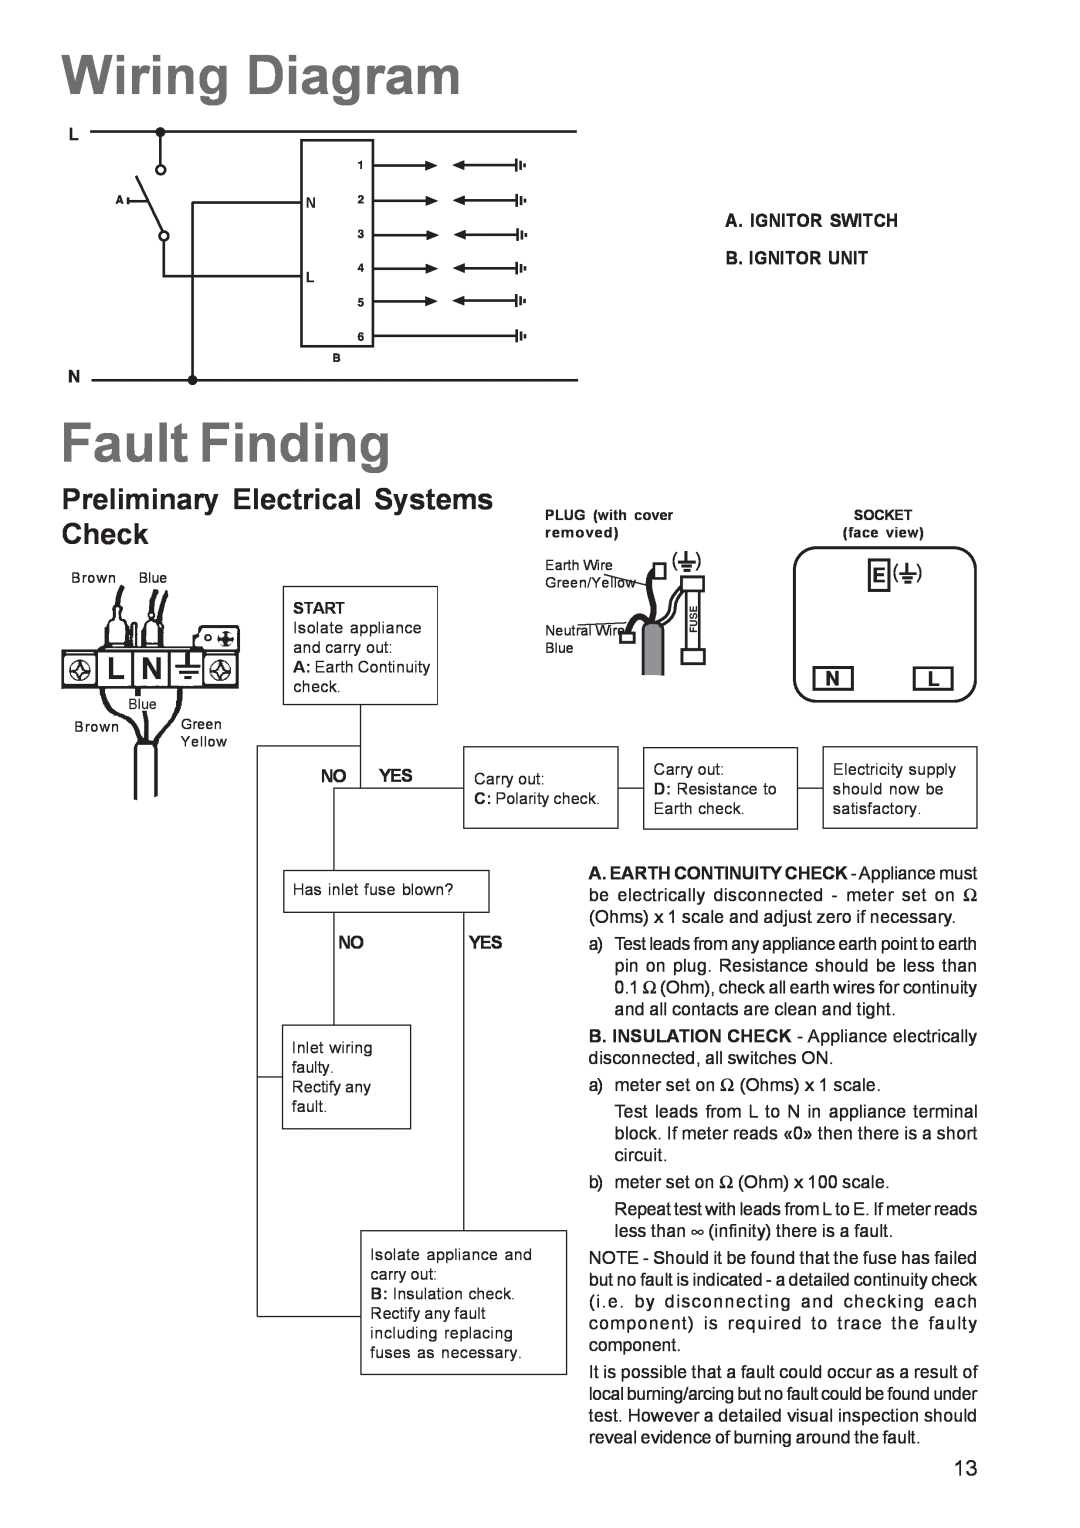 Zanussi ZGF 982 manual Wiring Diagram, Fault Finding, Preliminary Electrical Systems Check 